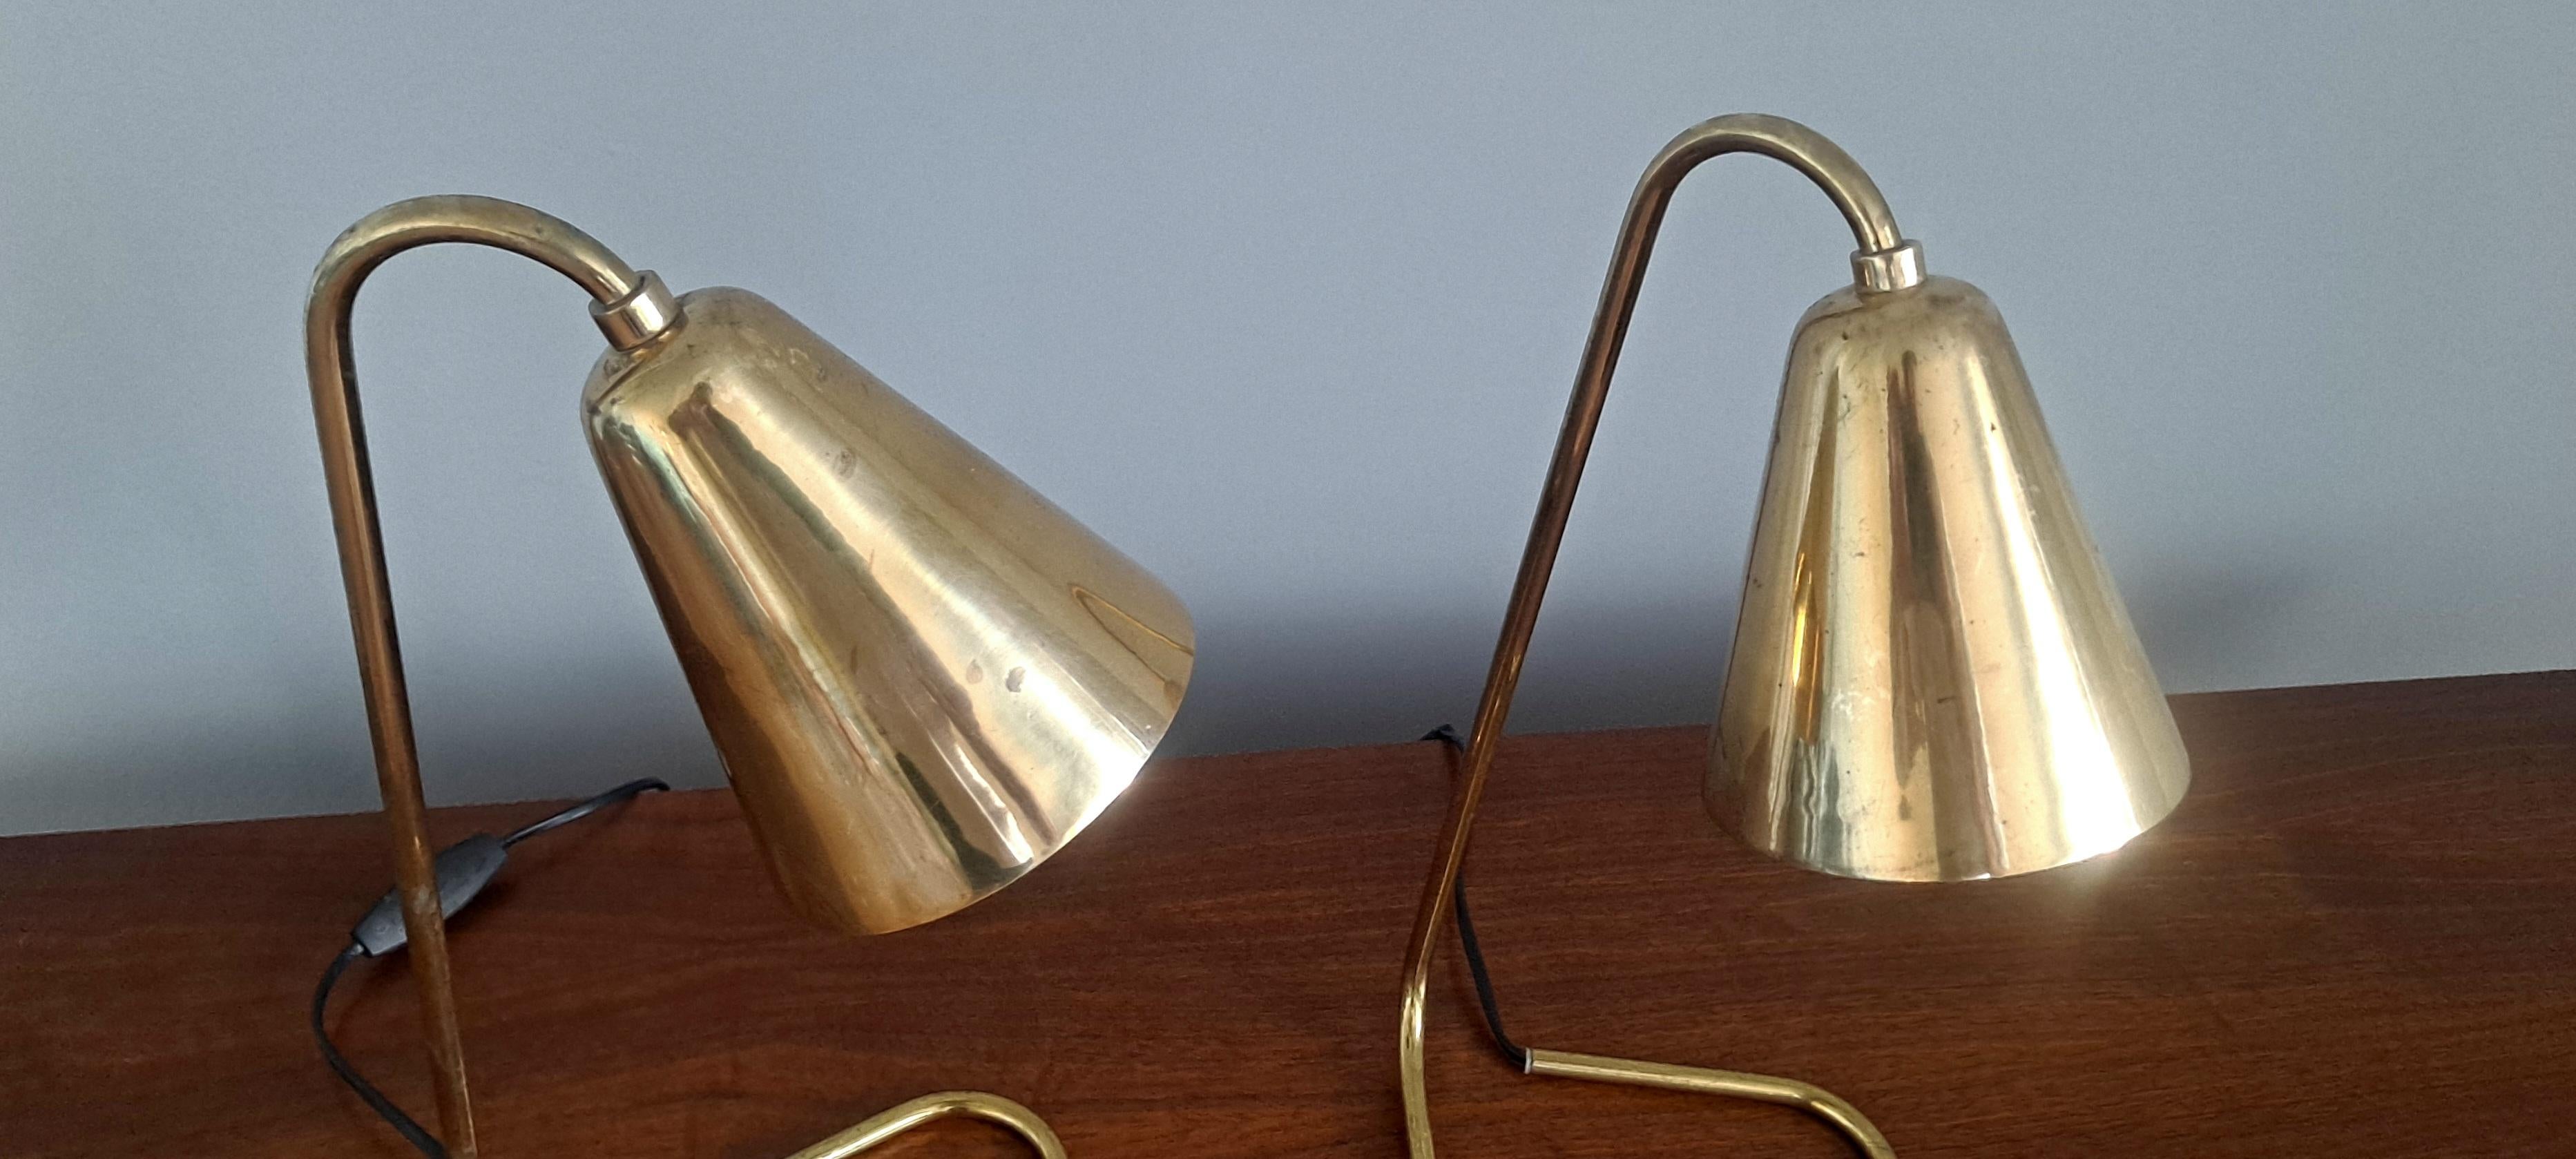 Pair of French Table Lamp Attributed to Robert Mathieu For Sale 1